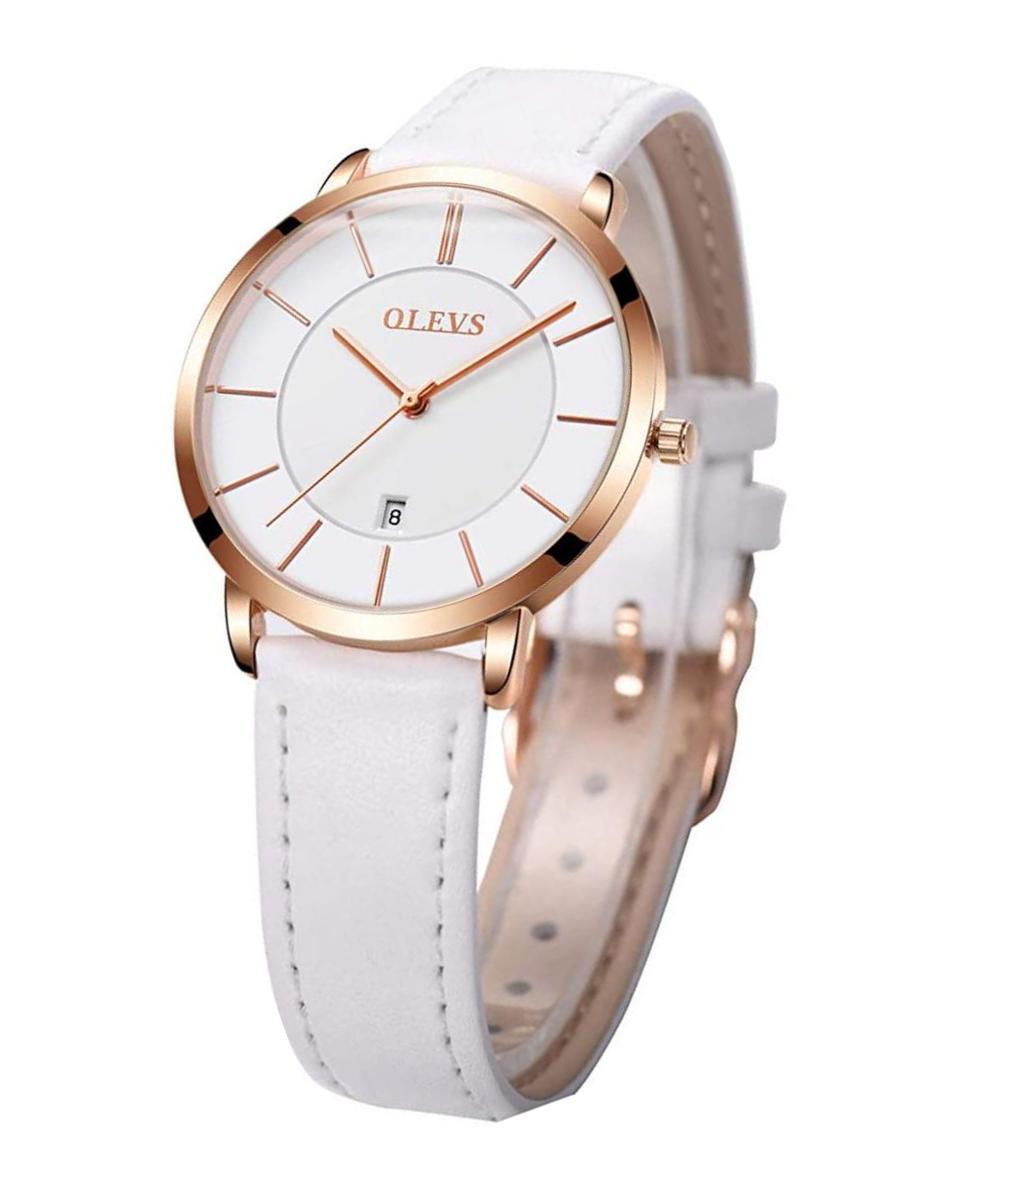 Primary image for Women's Watches for Ladies Female Wrist Watch